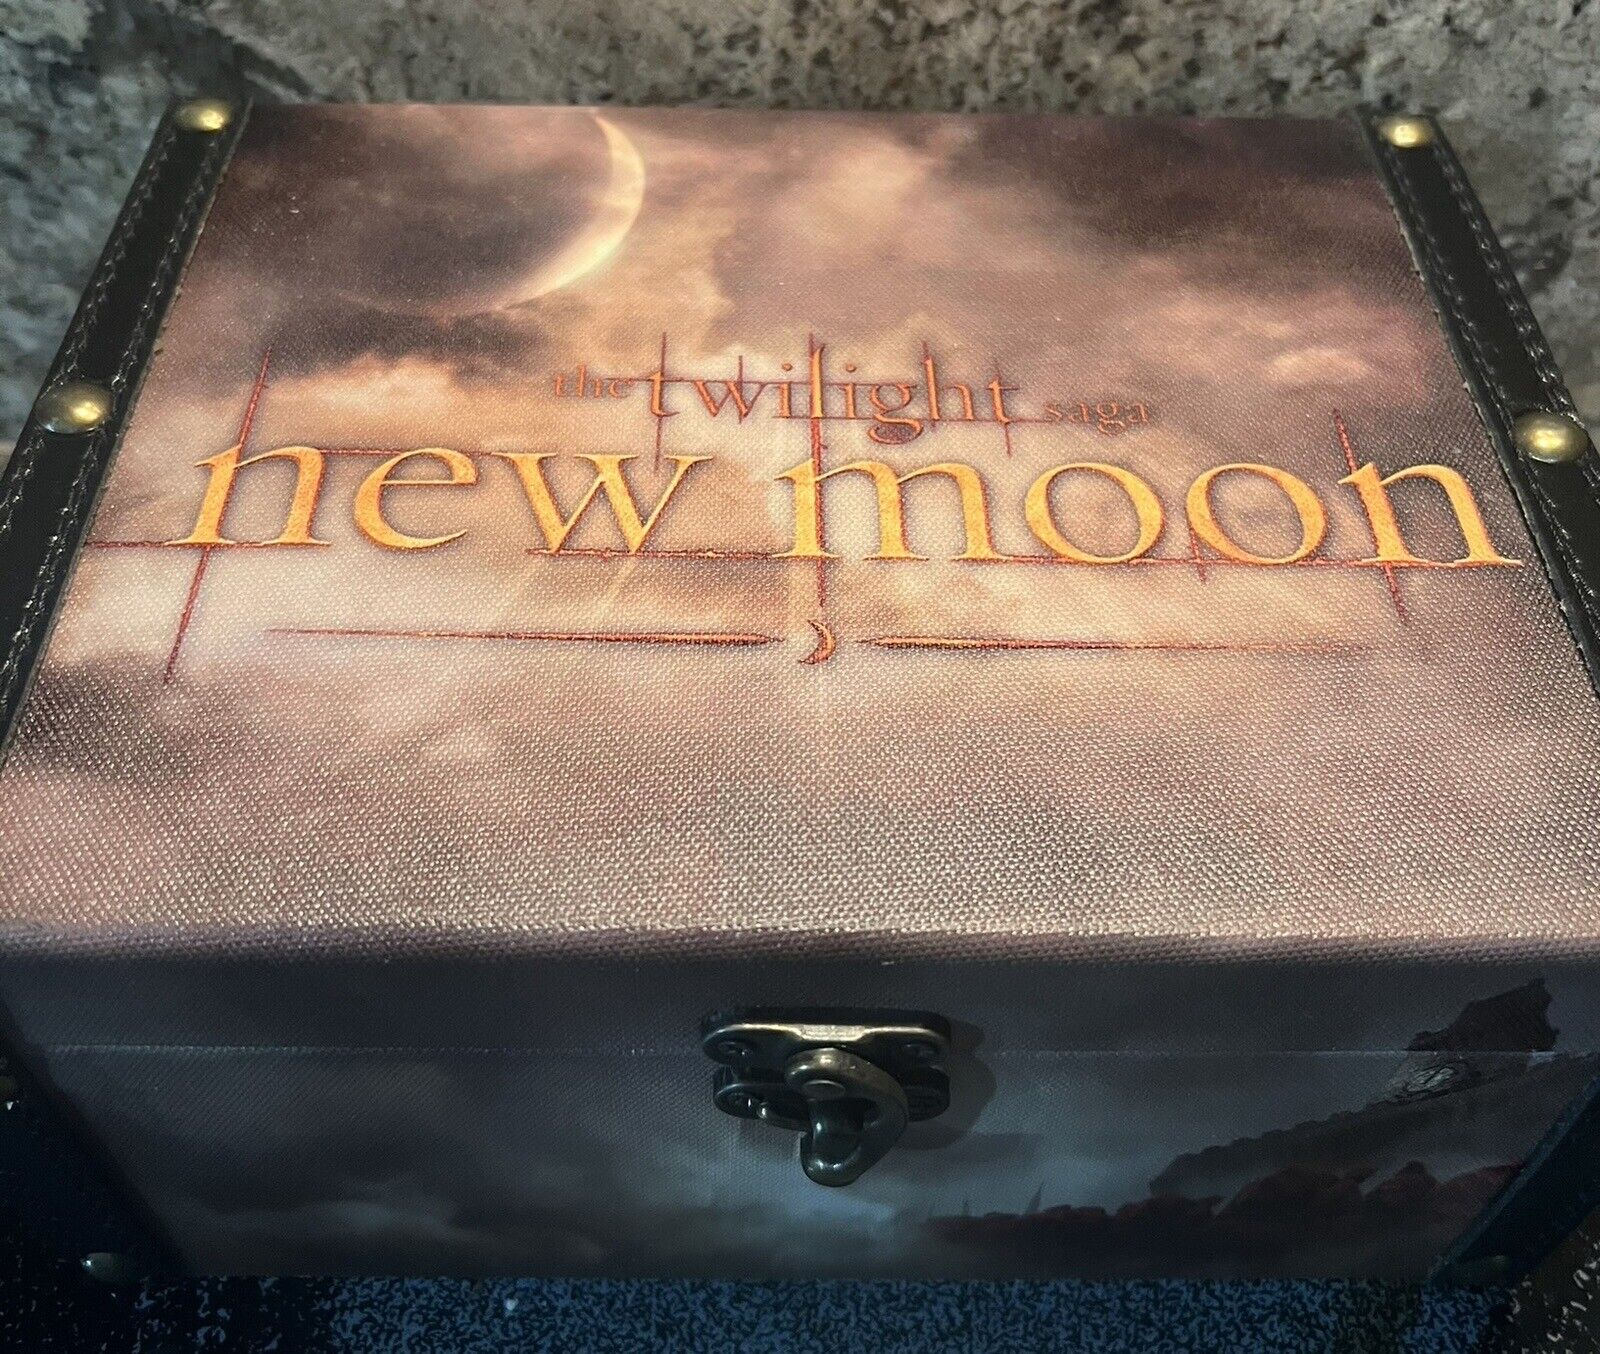 Twilight New Moon Vintage DVD Case “Heroes And Villains” By NECA.